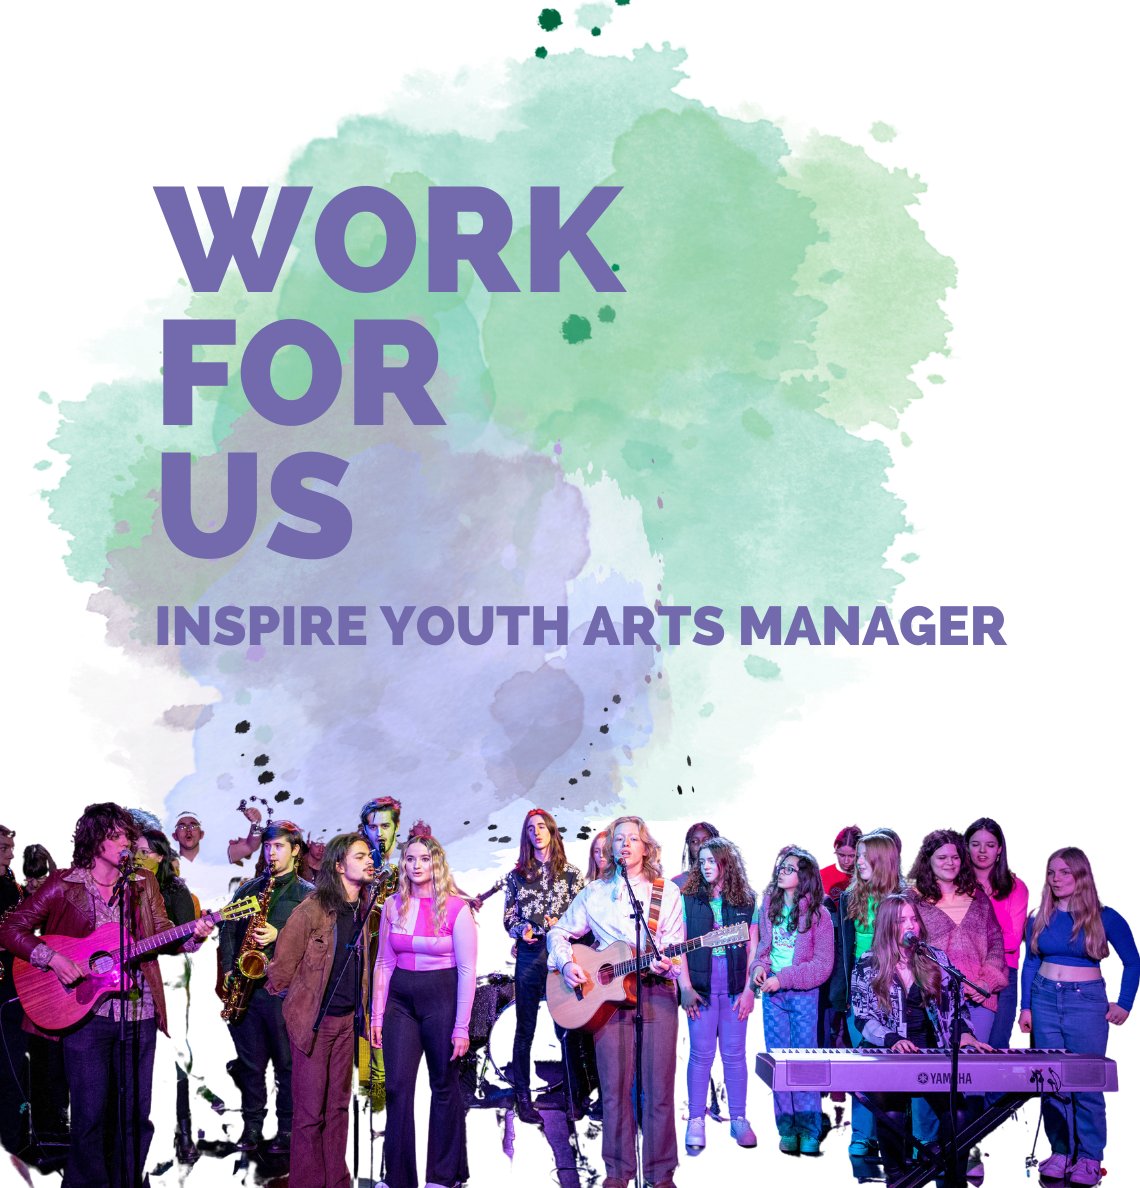 📢 We're hiring! 📢 We're looking for an Inspire Youth Arts Manager 🎸 We are seeking an experienced, skilled, creative, and enthusiastic professional with vision to lead and develop the service. 📆Closing date: 7 July, 12pm Find out more and apply: bit.ly/iyamanager